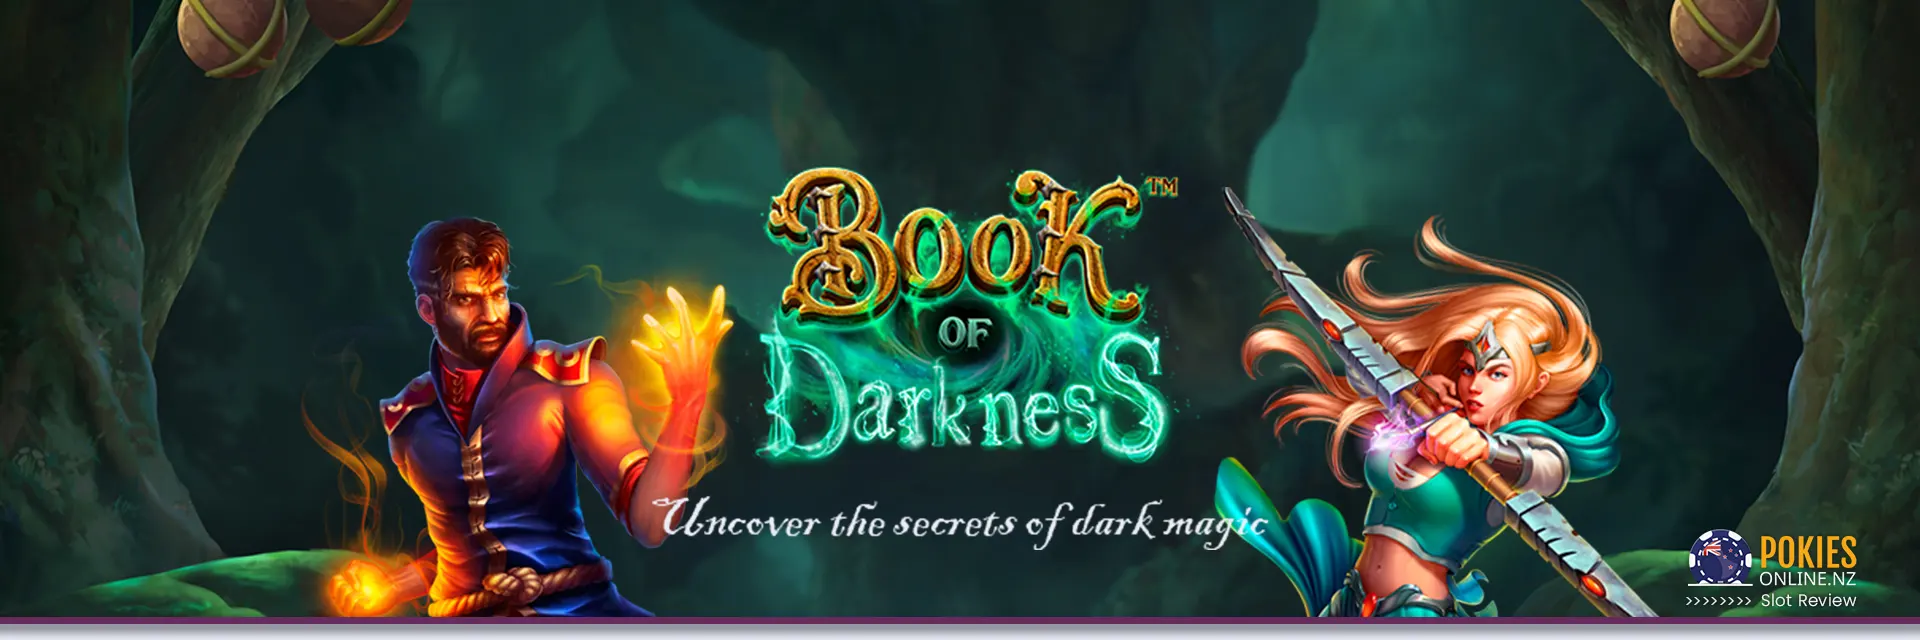 Book Of Darkness slot Banner